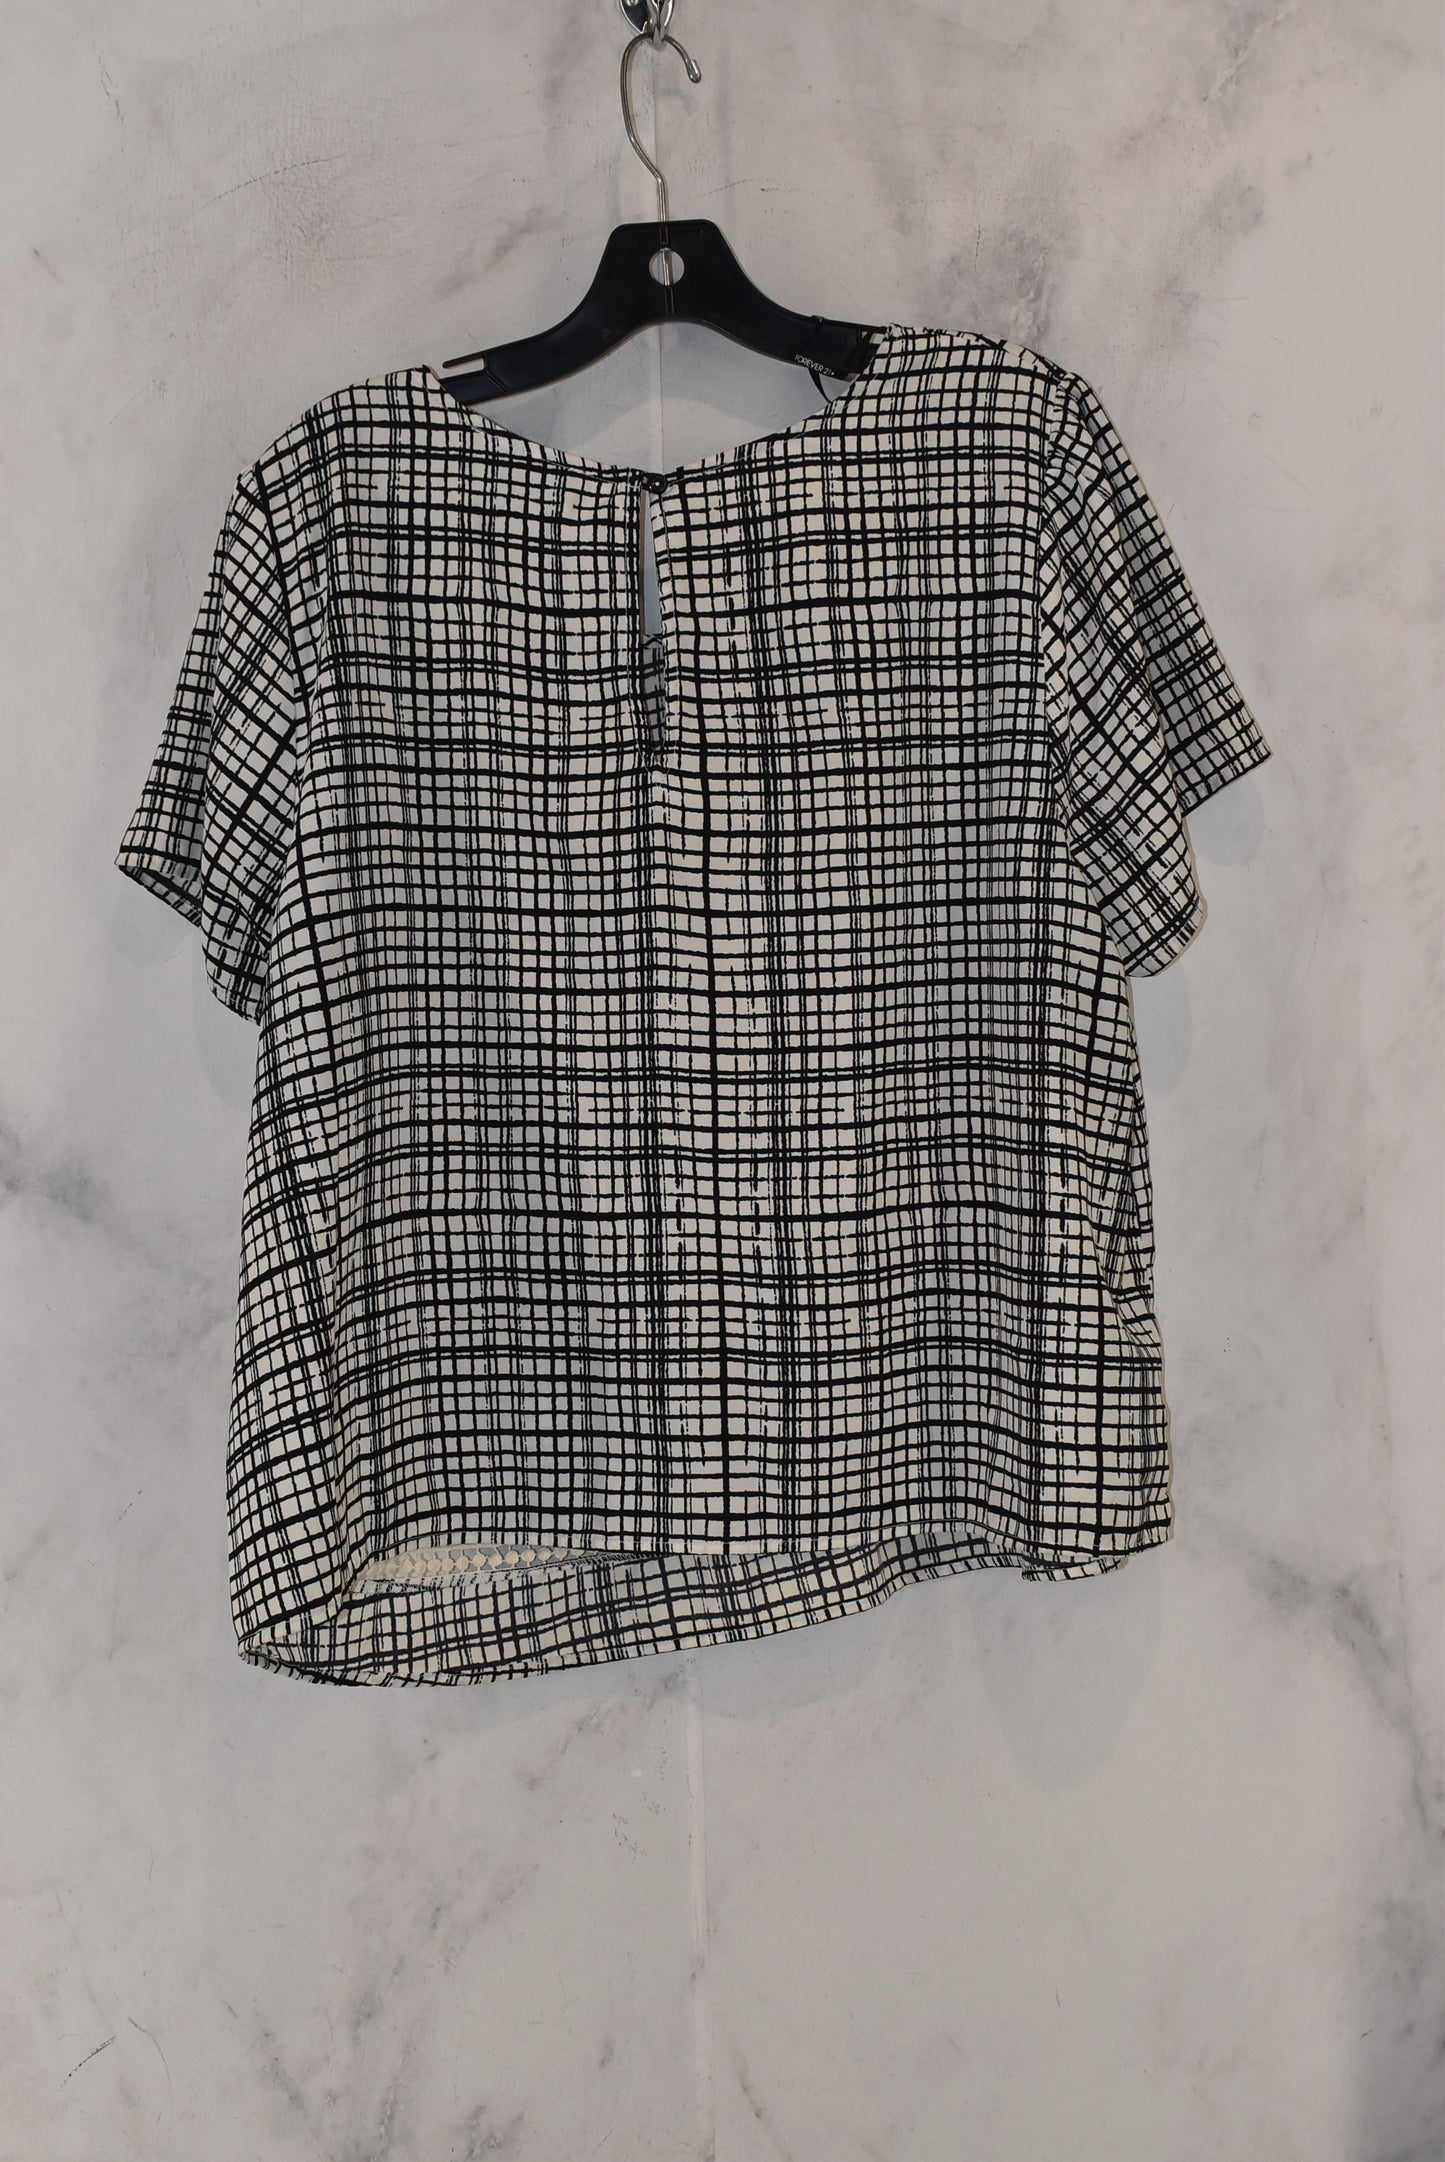 Top Short Sleeve By Forever 21  Size: 2x